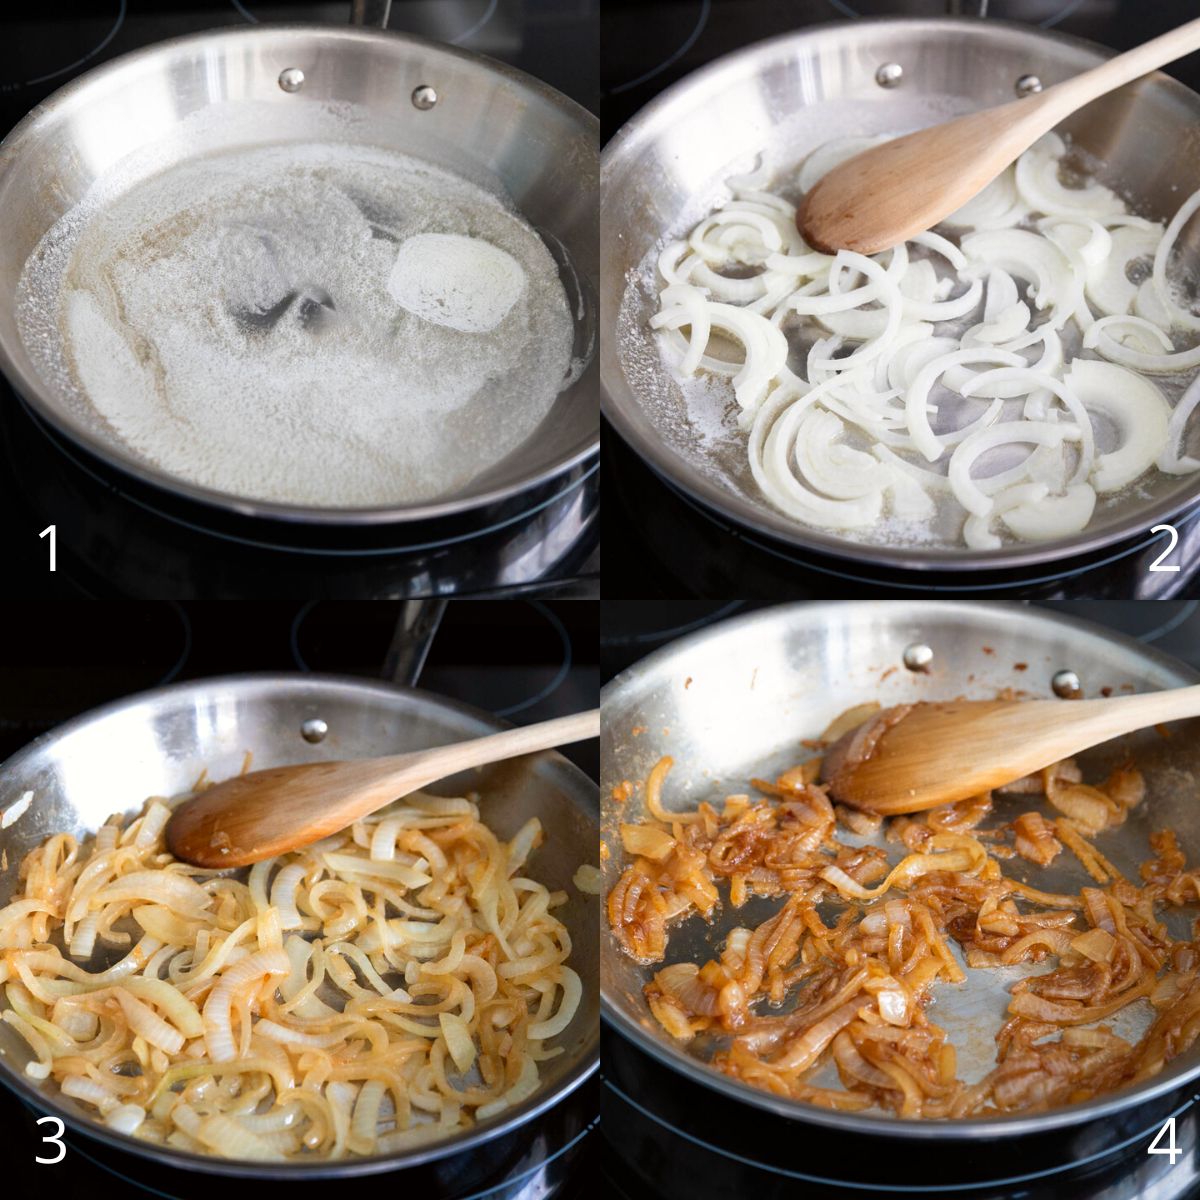 The step by step photos show how to melt the butter and caramelize the onions in a skillet.